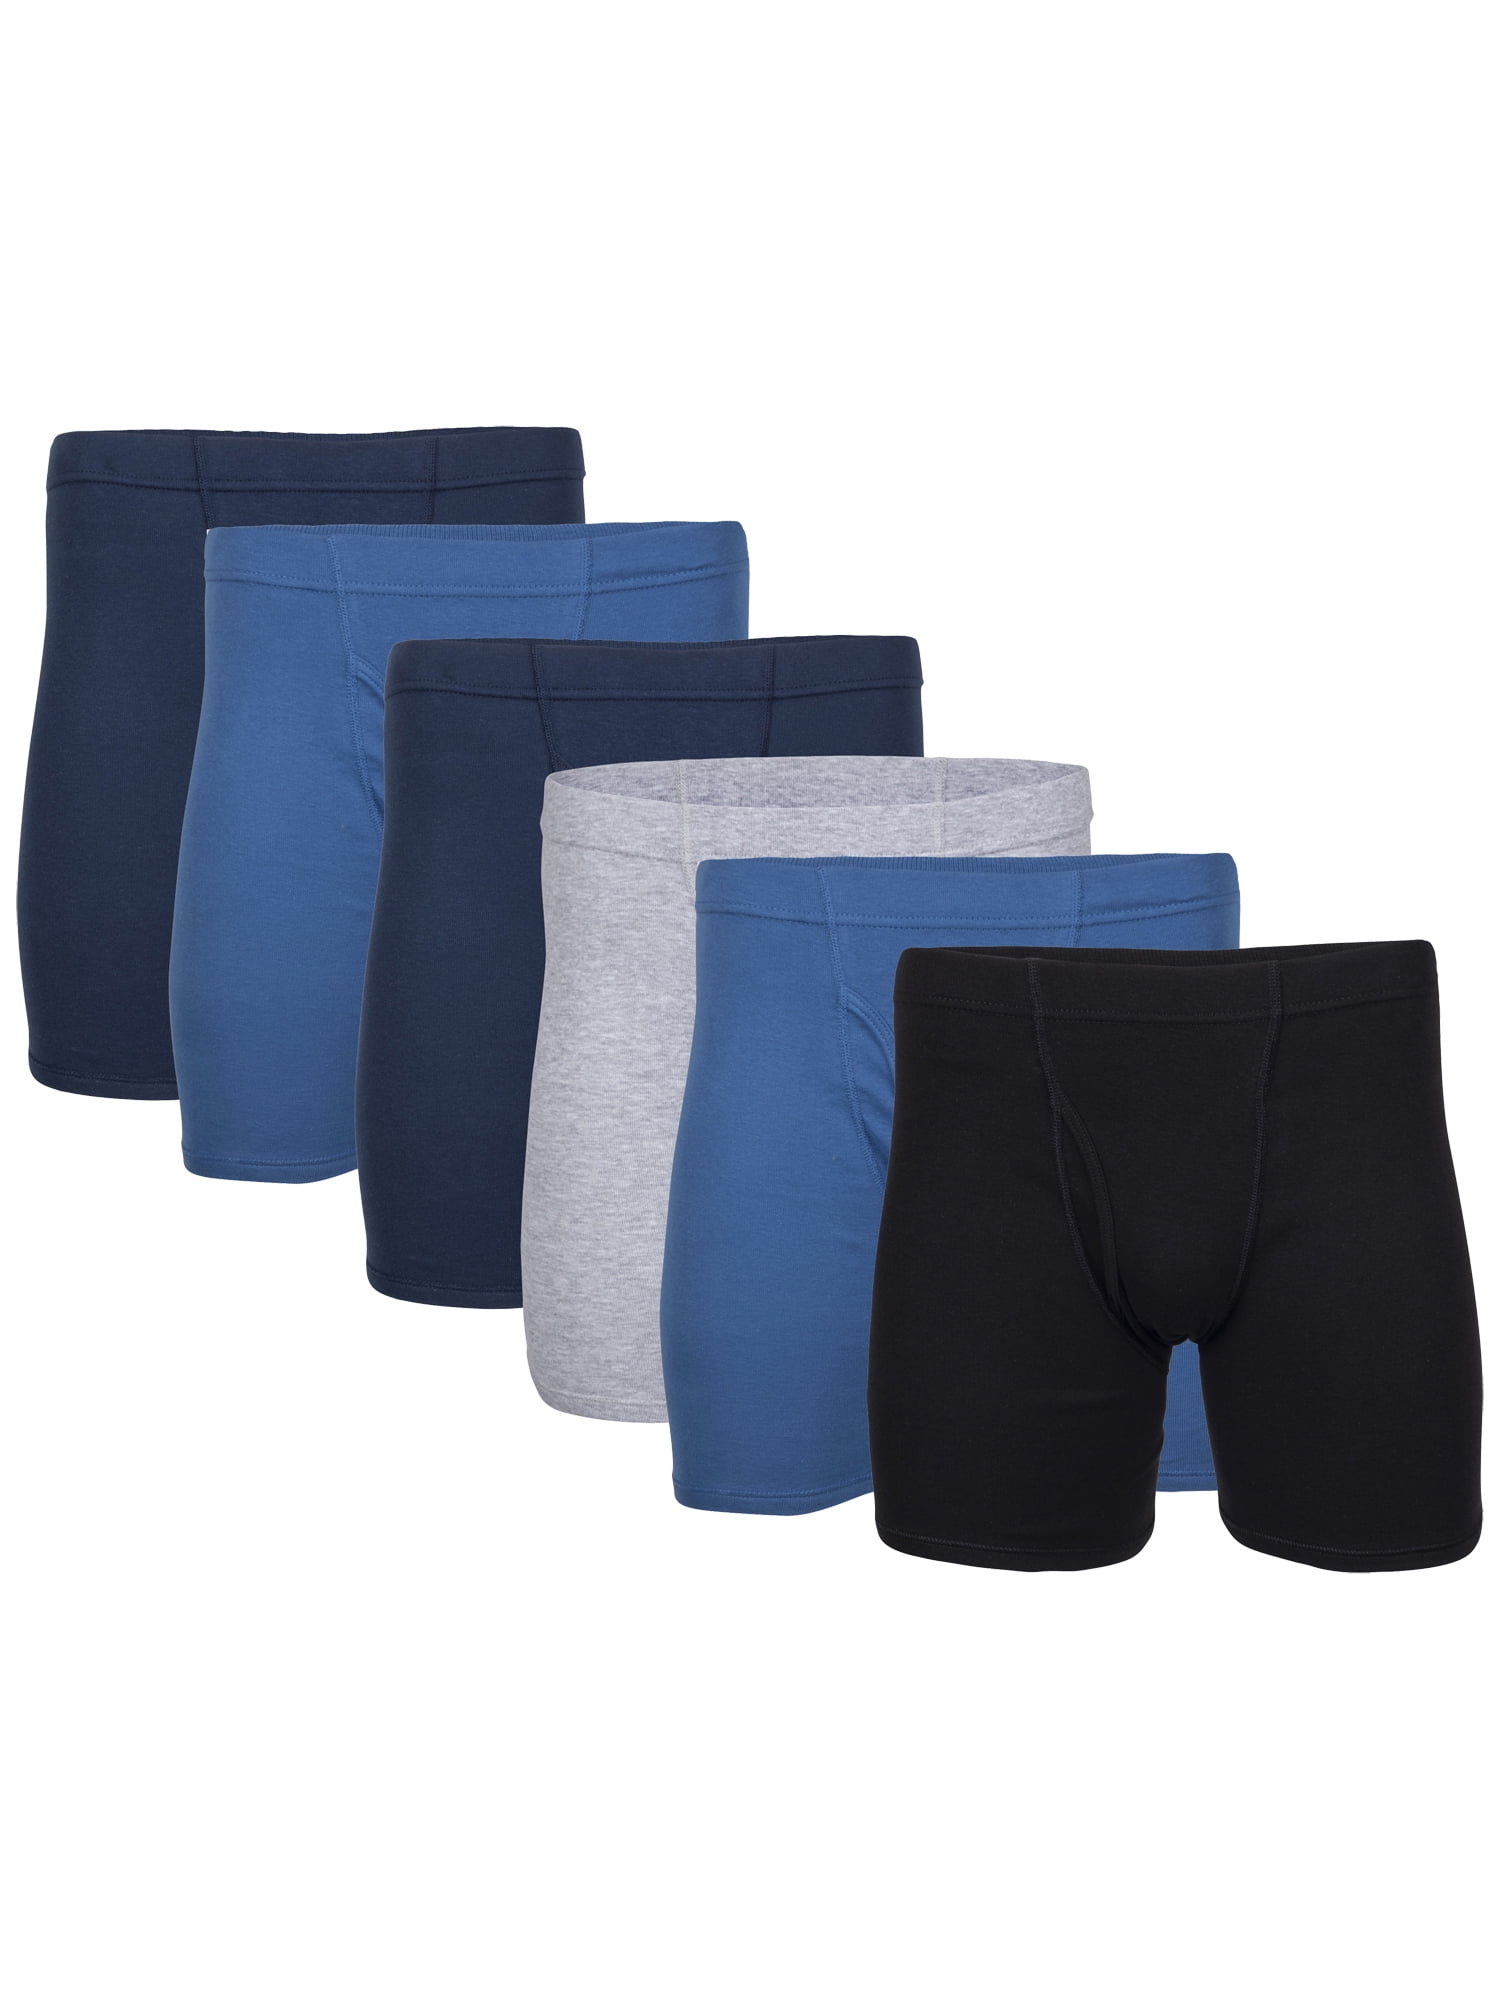 12 x Mens Button Fly Boxer Shorts Underwear with Elastic Waist Band 